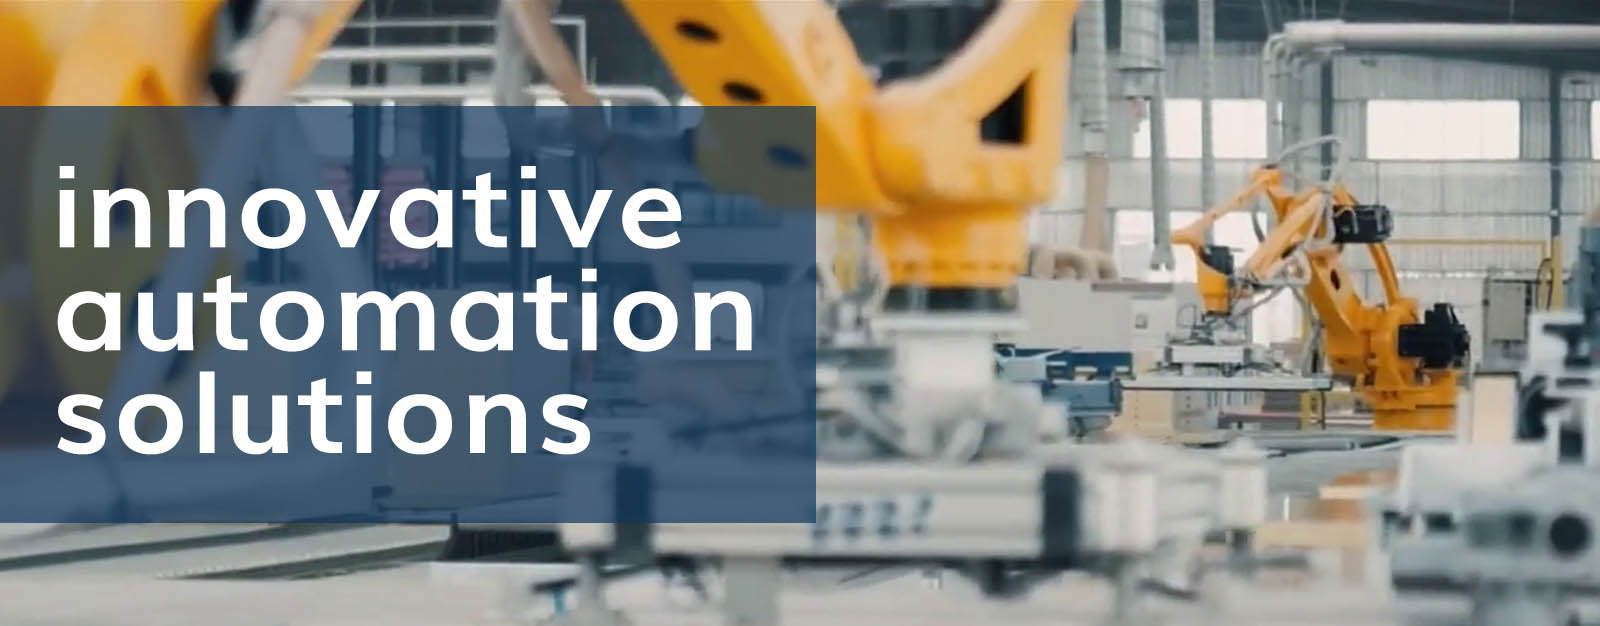 DW Robotics and Technologies - innovative automation solutions